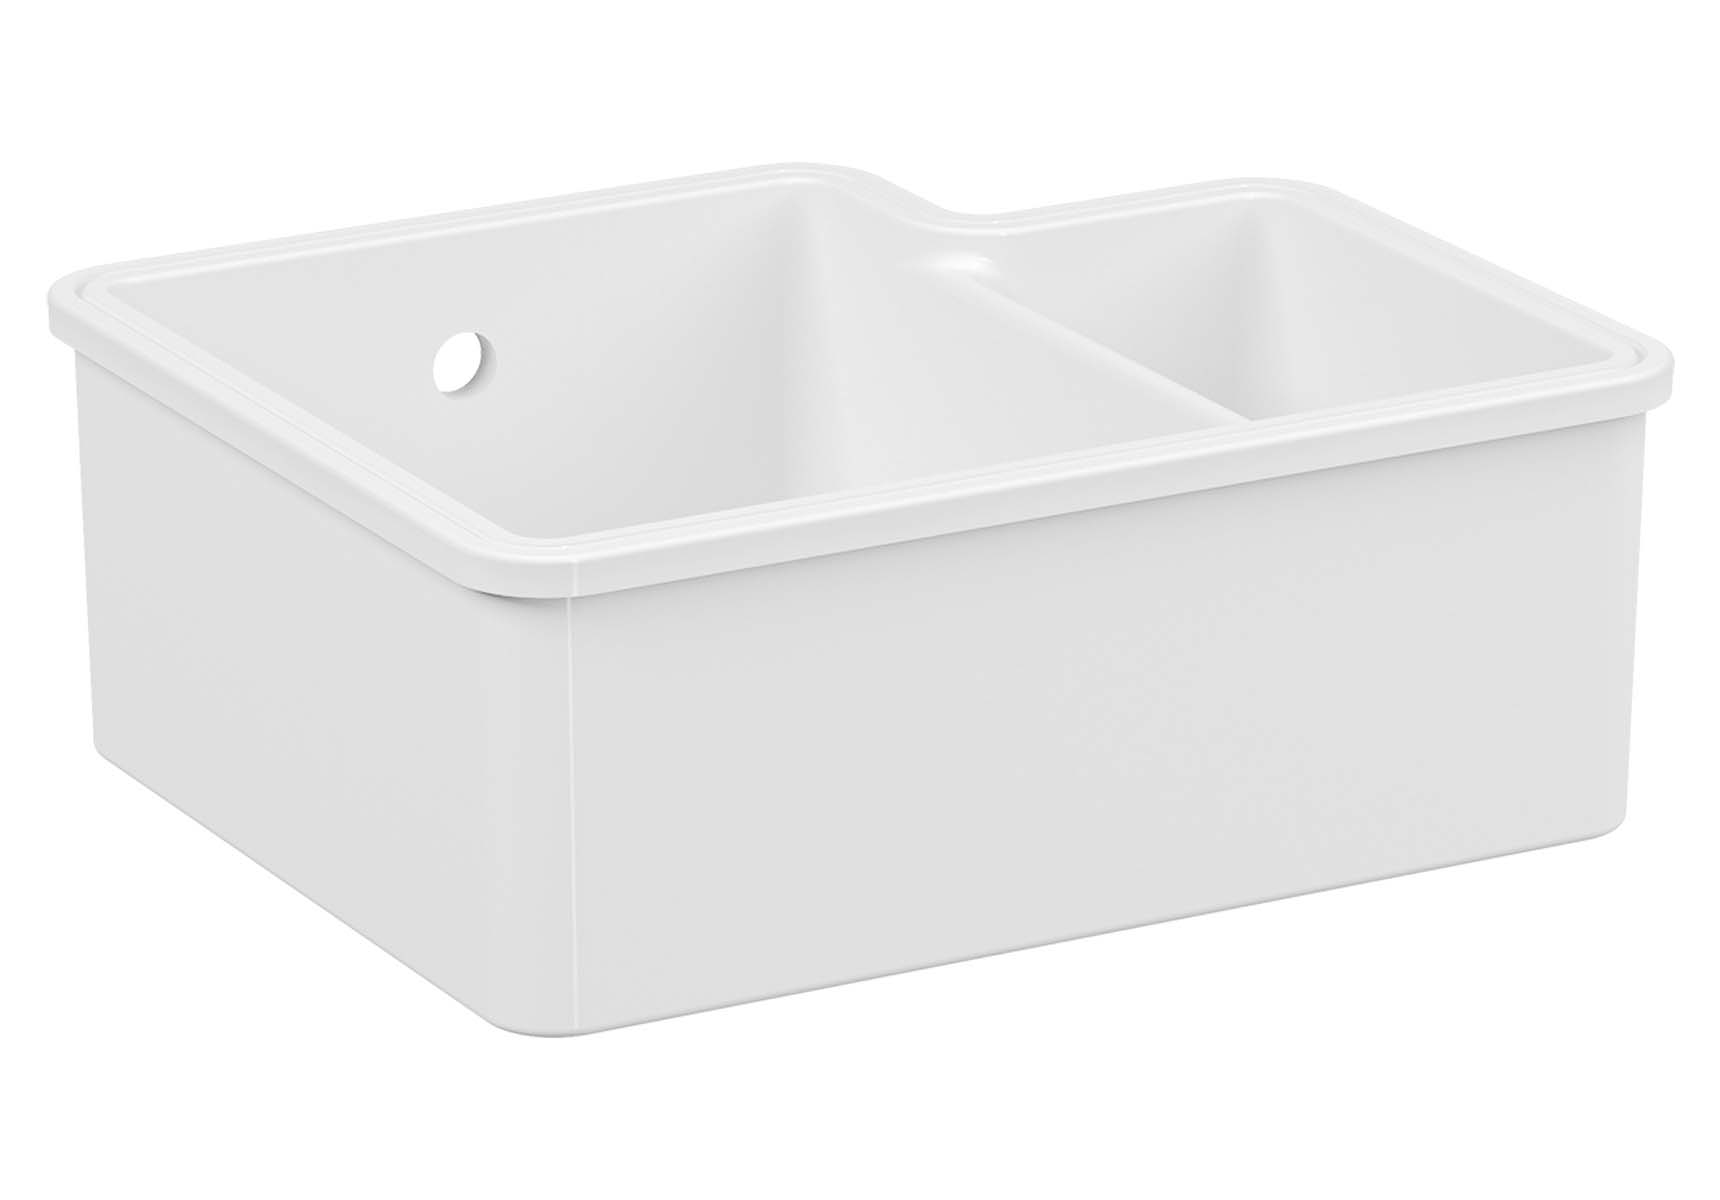 Undercounter Sink, 55 cm, 1.5 bowl, without tap hole, with overflow hole, white